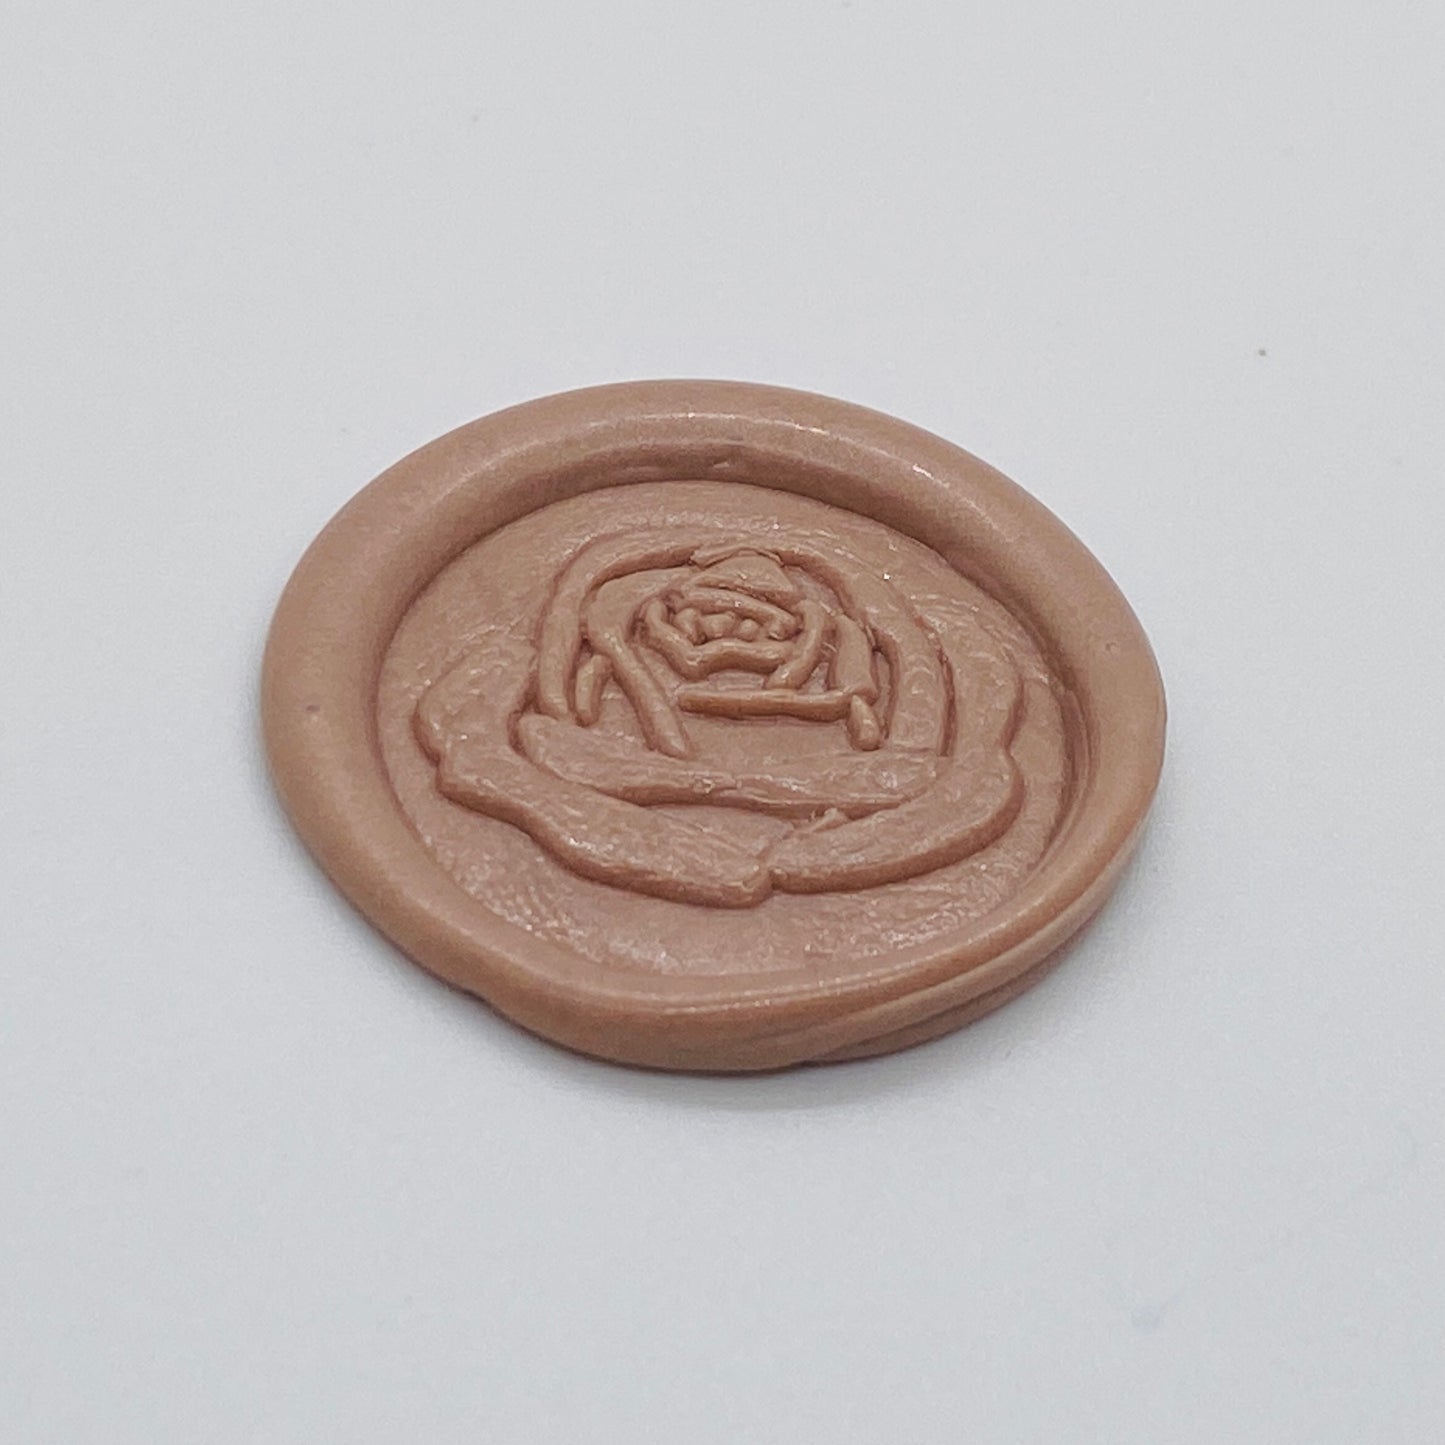 Wax Seals, Rose Wax Seal in White and Taupe, Pack of 10 - Gallery360 Designs